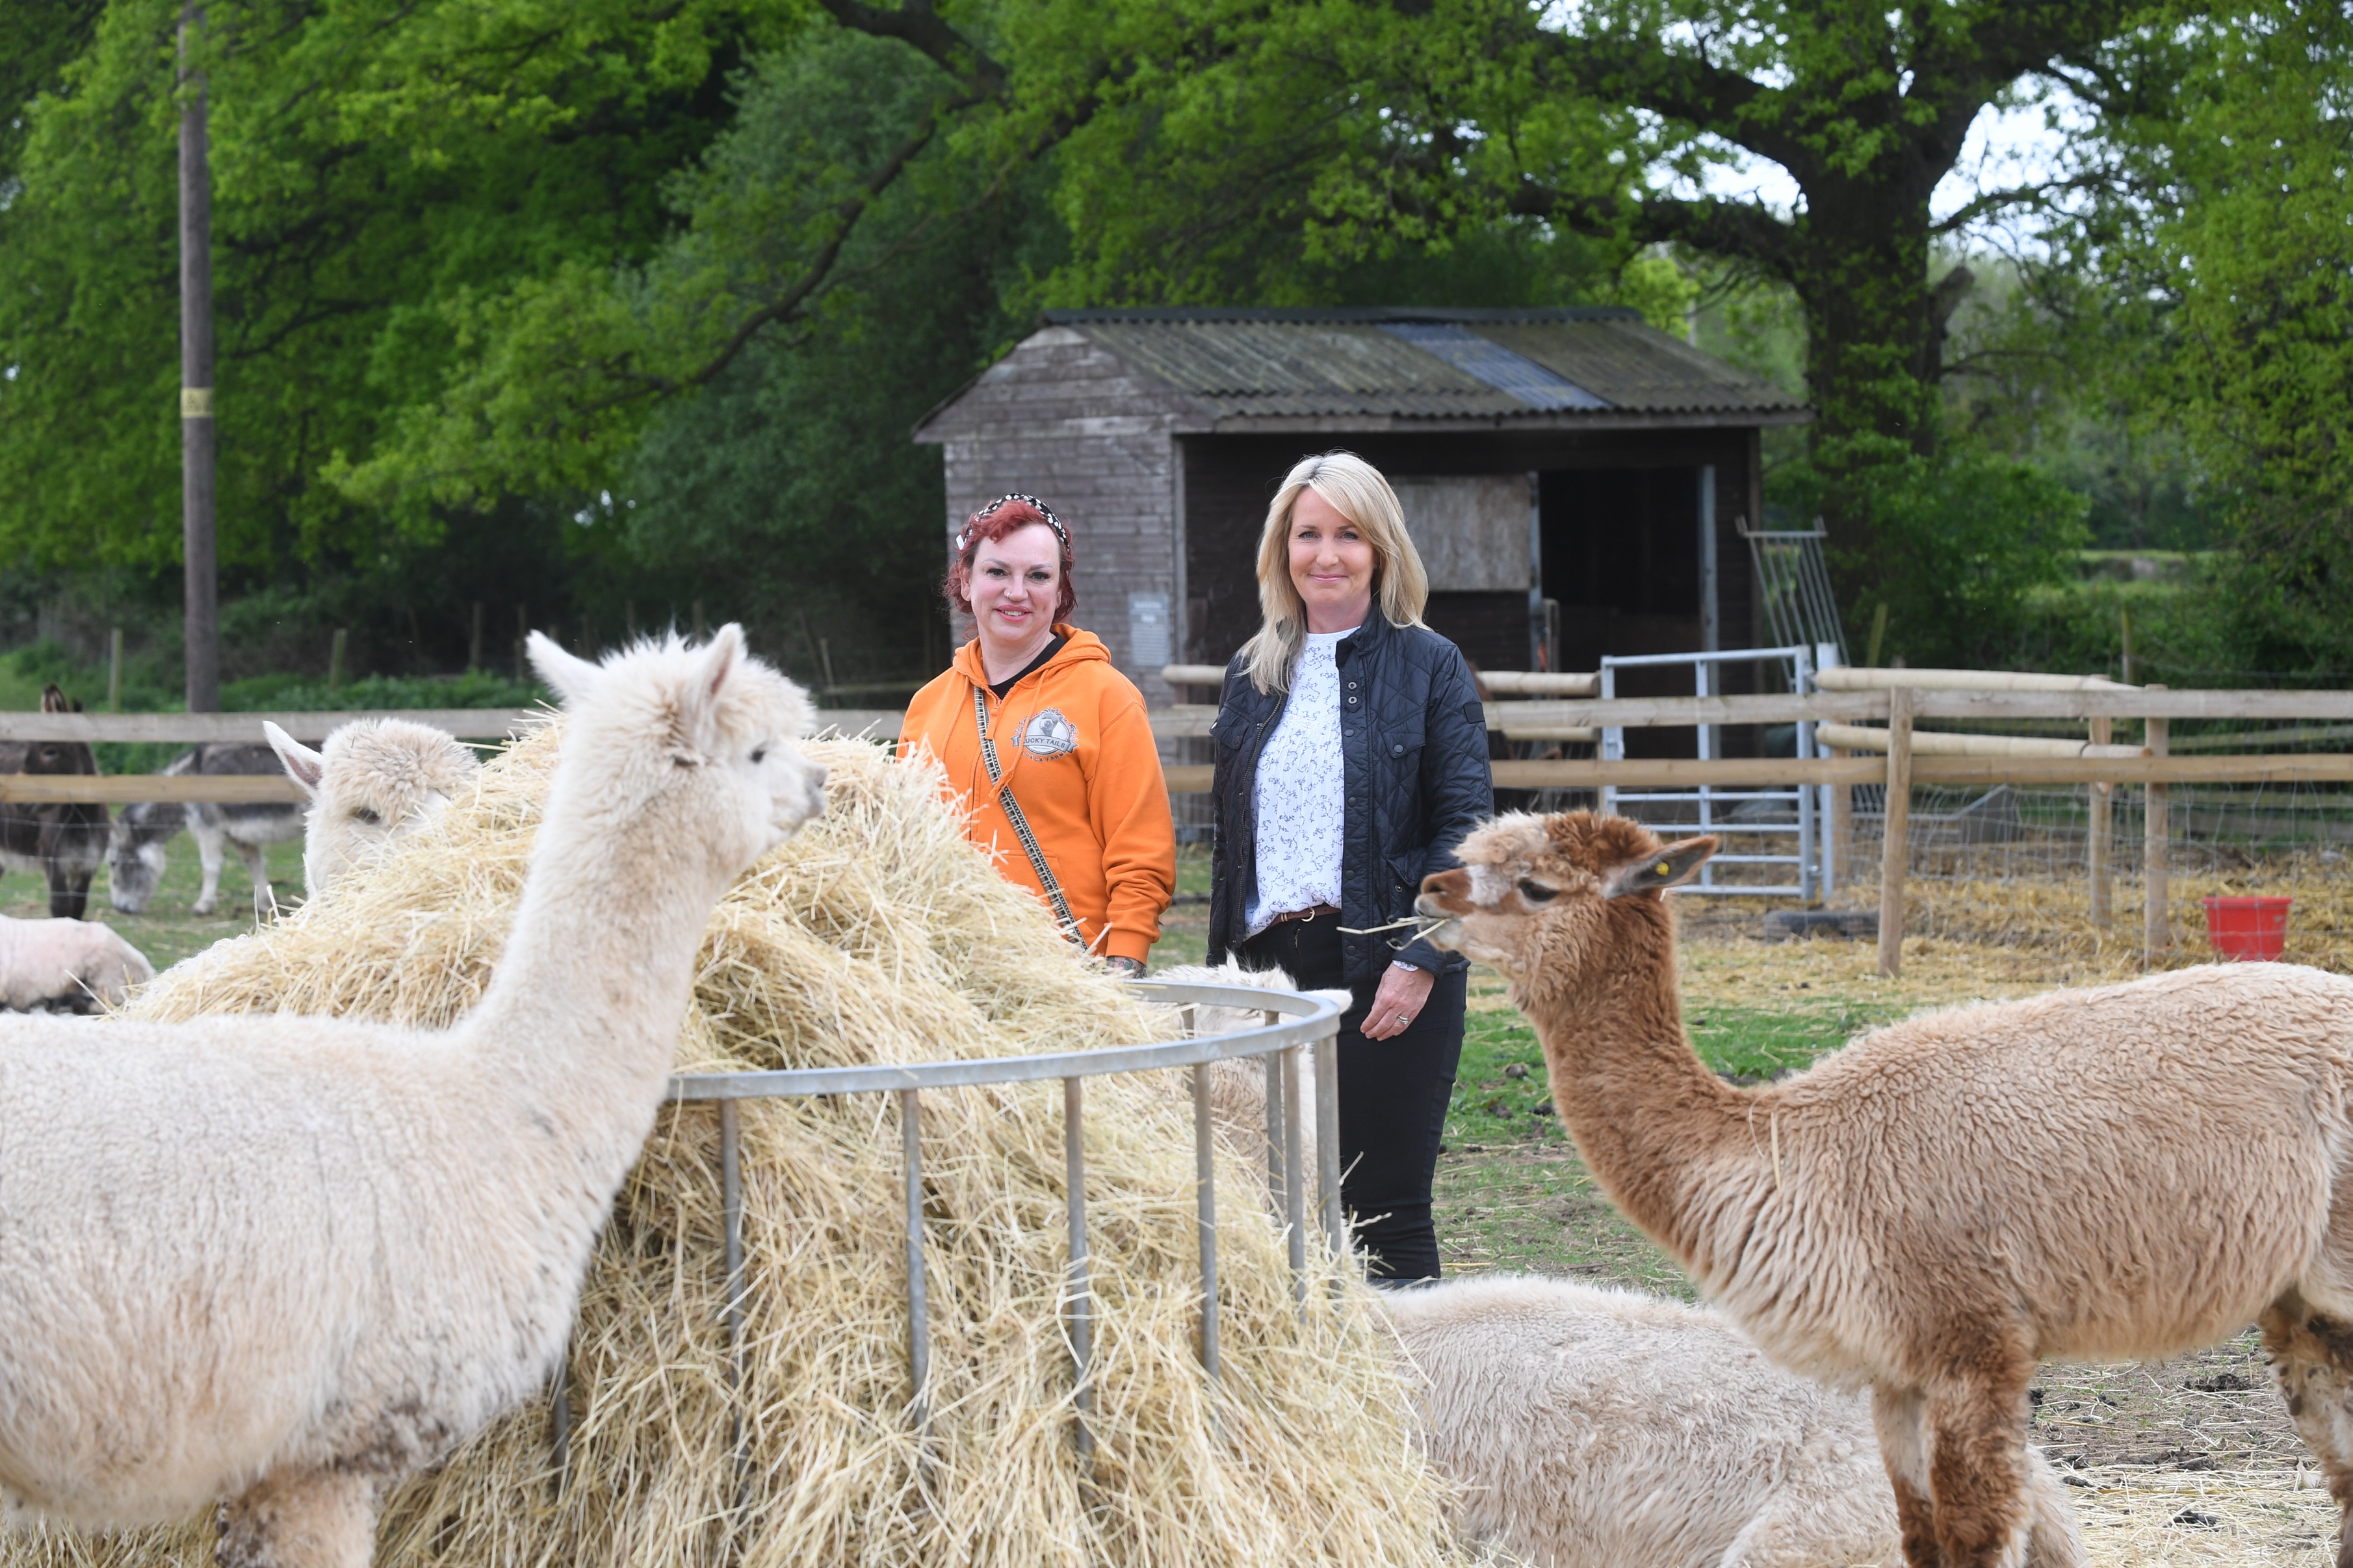 Alpaca Farm in North Warwickshire all set to grow after support